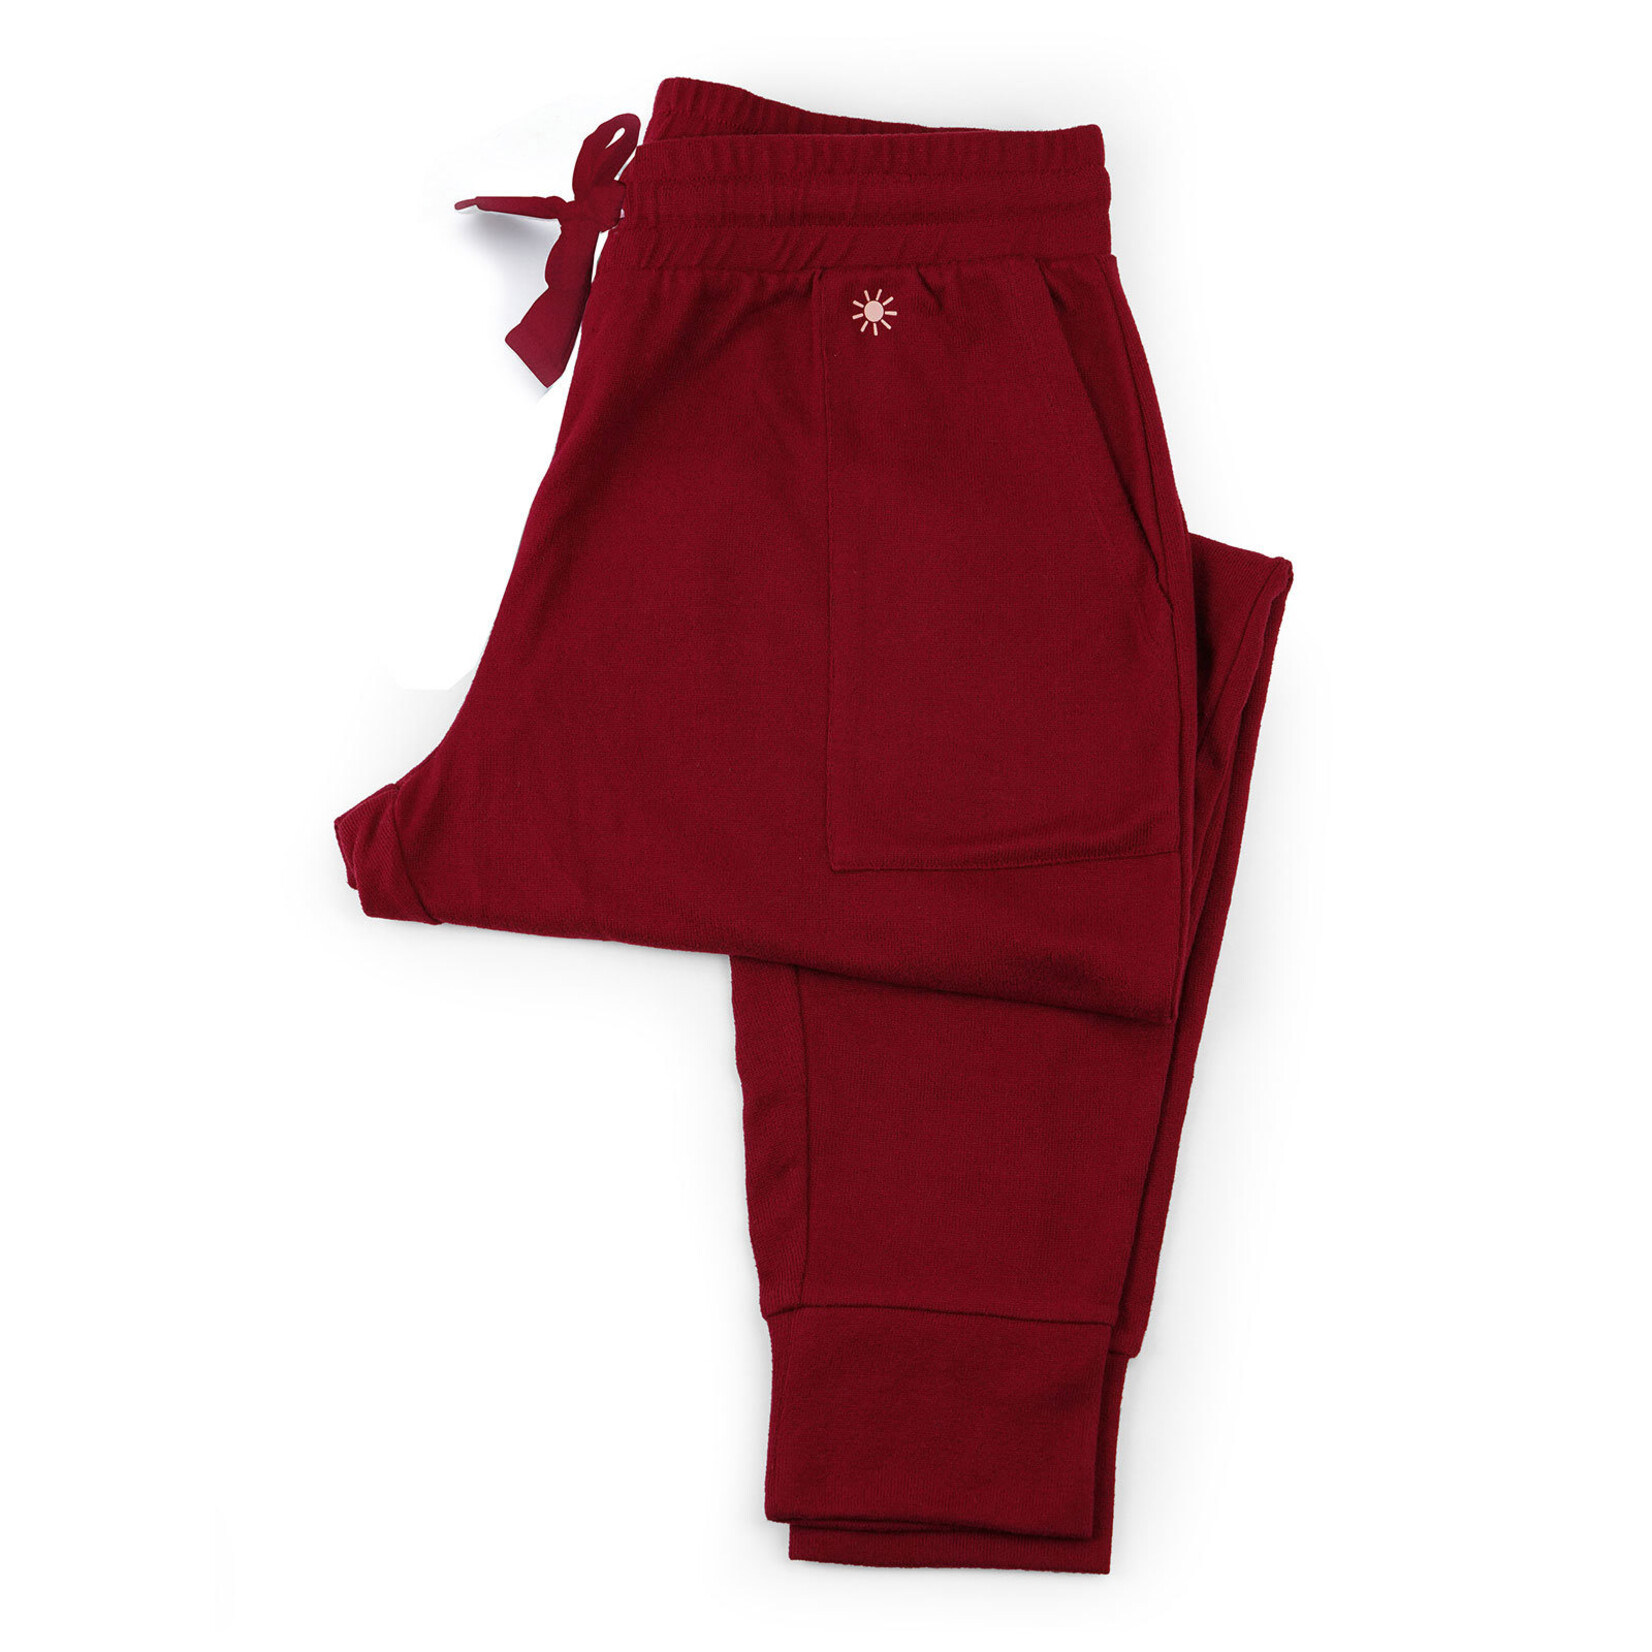 Hello Mello Best Day Ever Knit Joggers